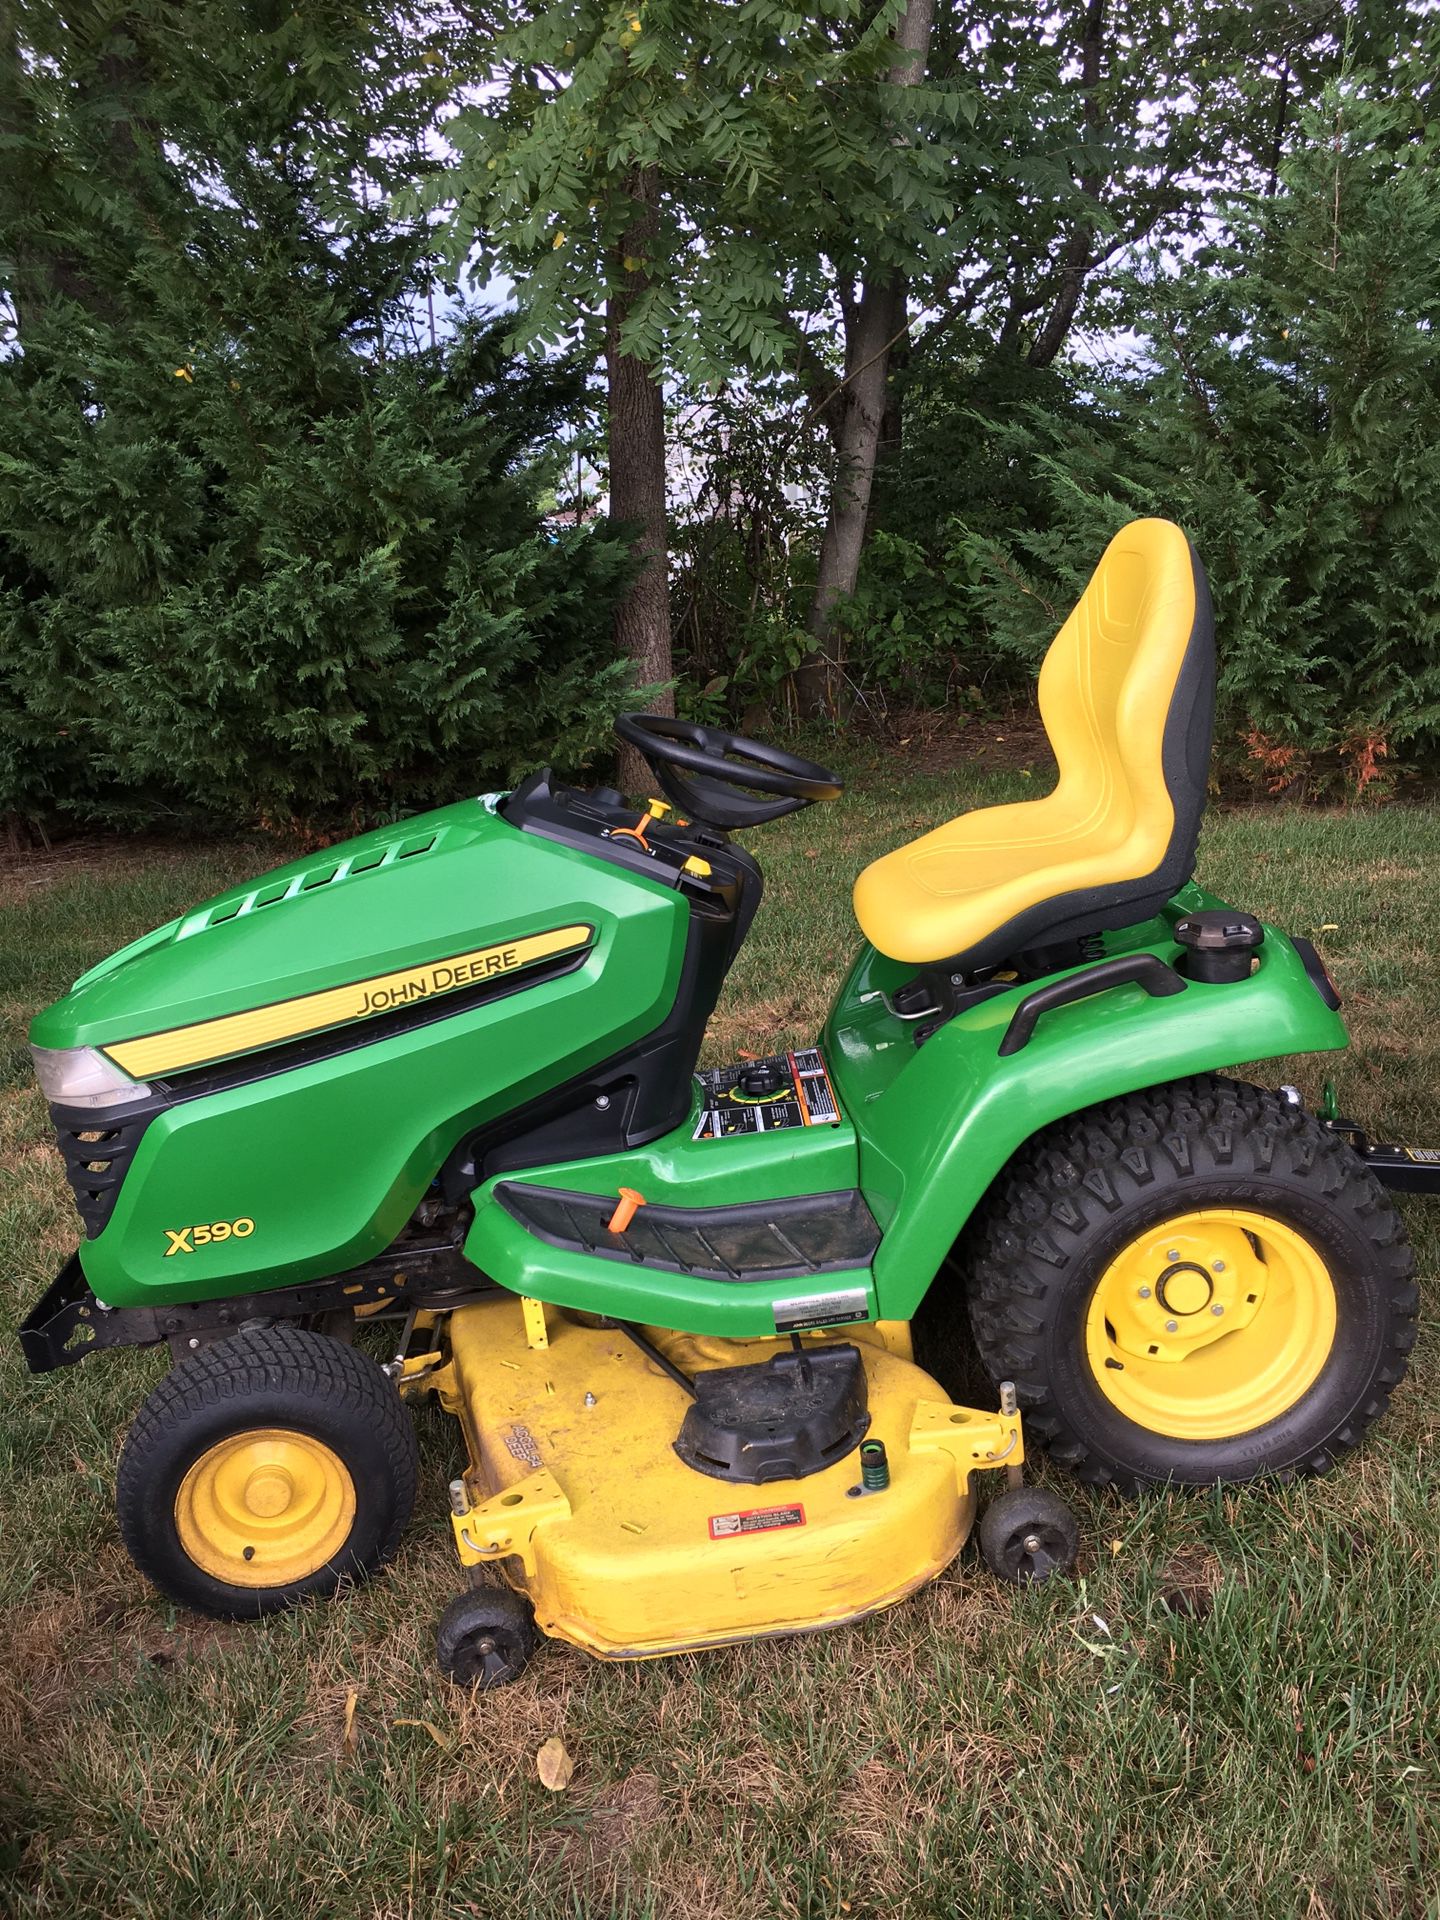 John Deere LawnTractor Model X590 With Attachments